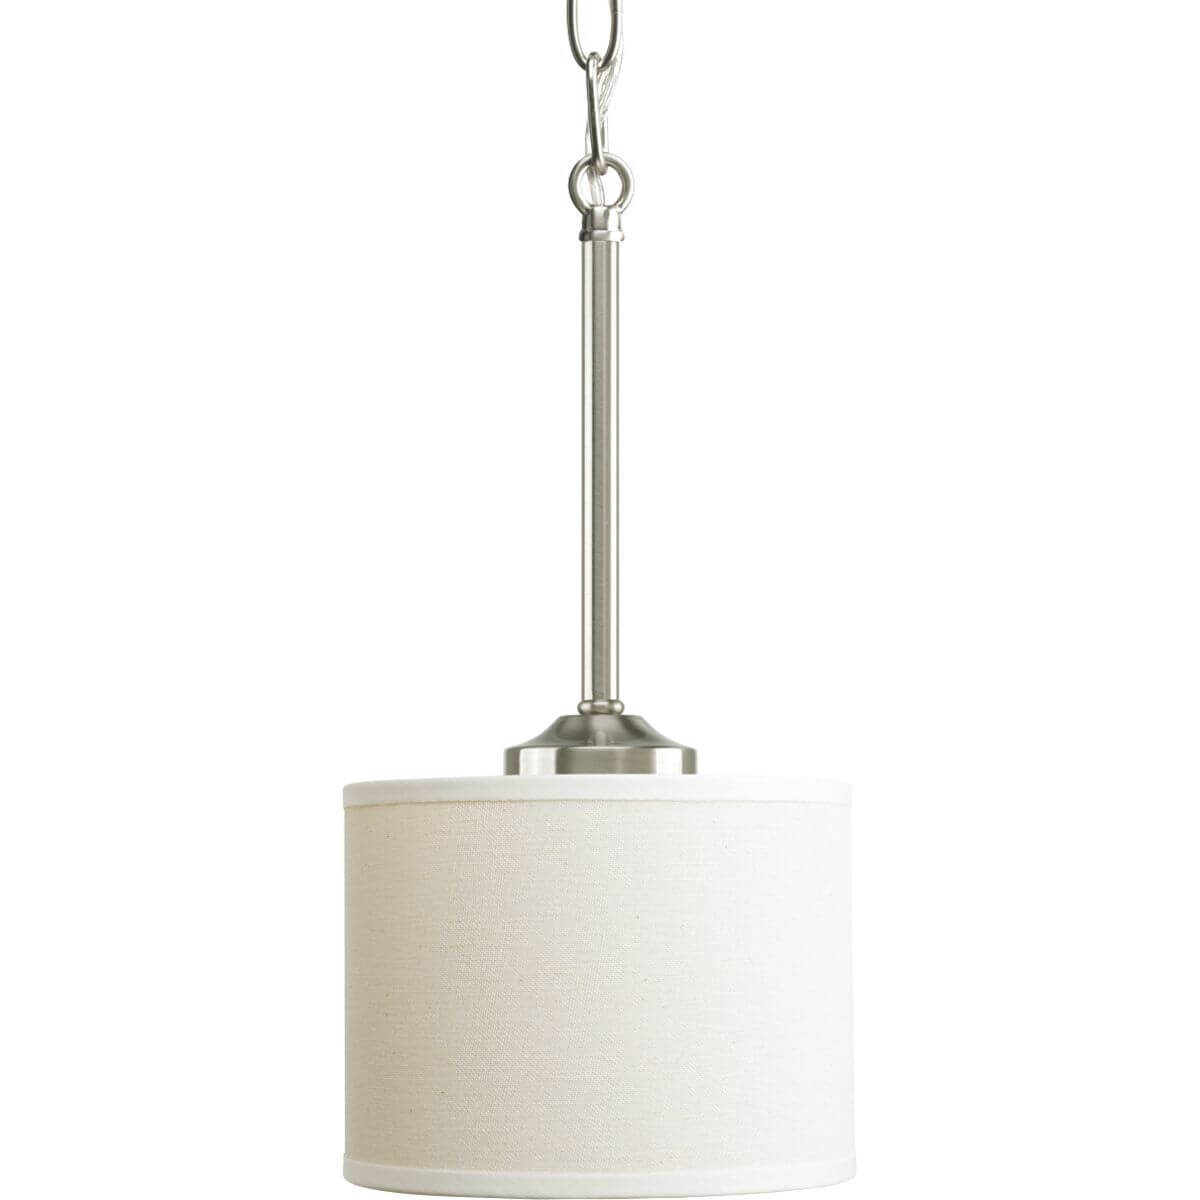 Progress Lighting Inspire 1 Light 7 inch Mini Pendant in Brushed Nickel with Off White Linen Drum Shade P5065-09